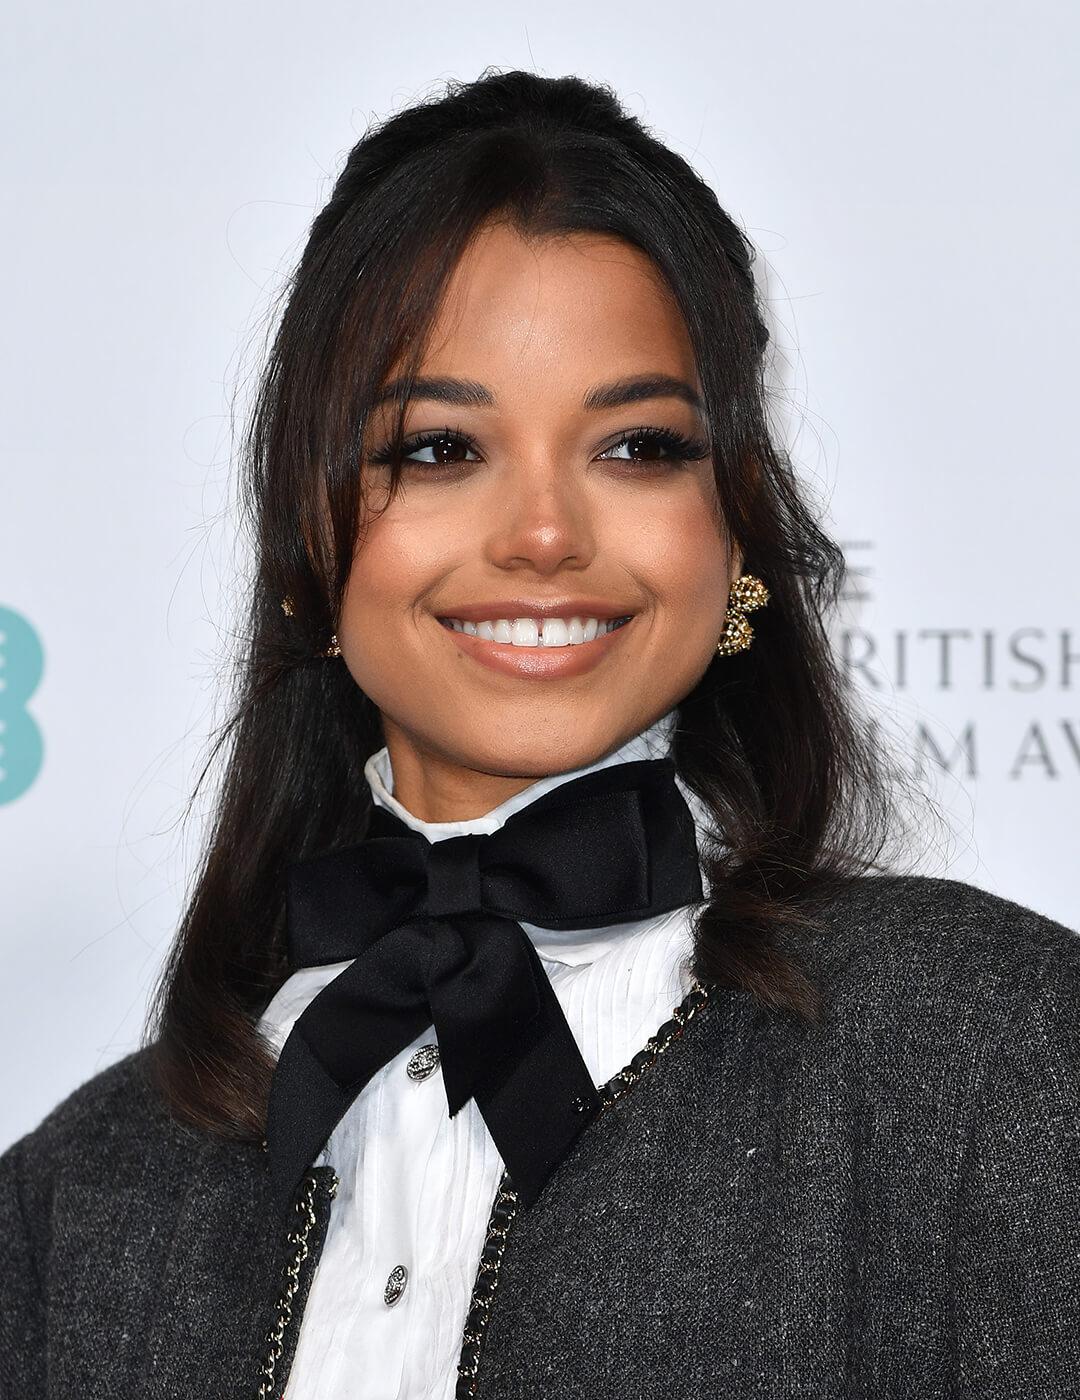 A photo of Ella Balinska wearing a bright smile in her nude lipstick, black bow tie, gold earrings with her black hair pulling a half-up, half-down hairstyle 